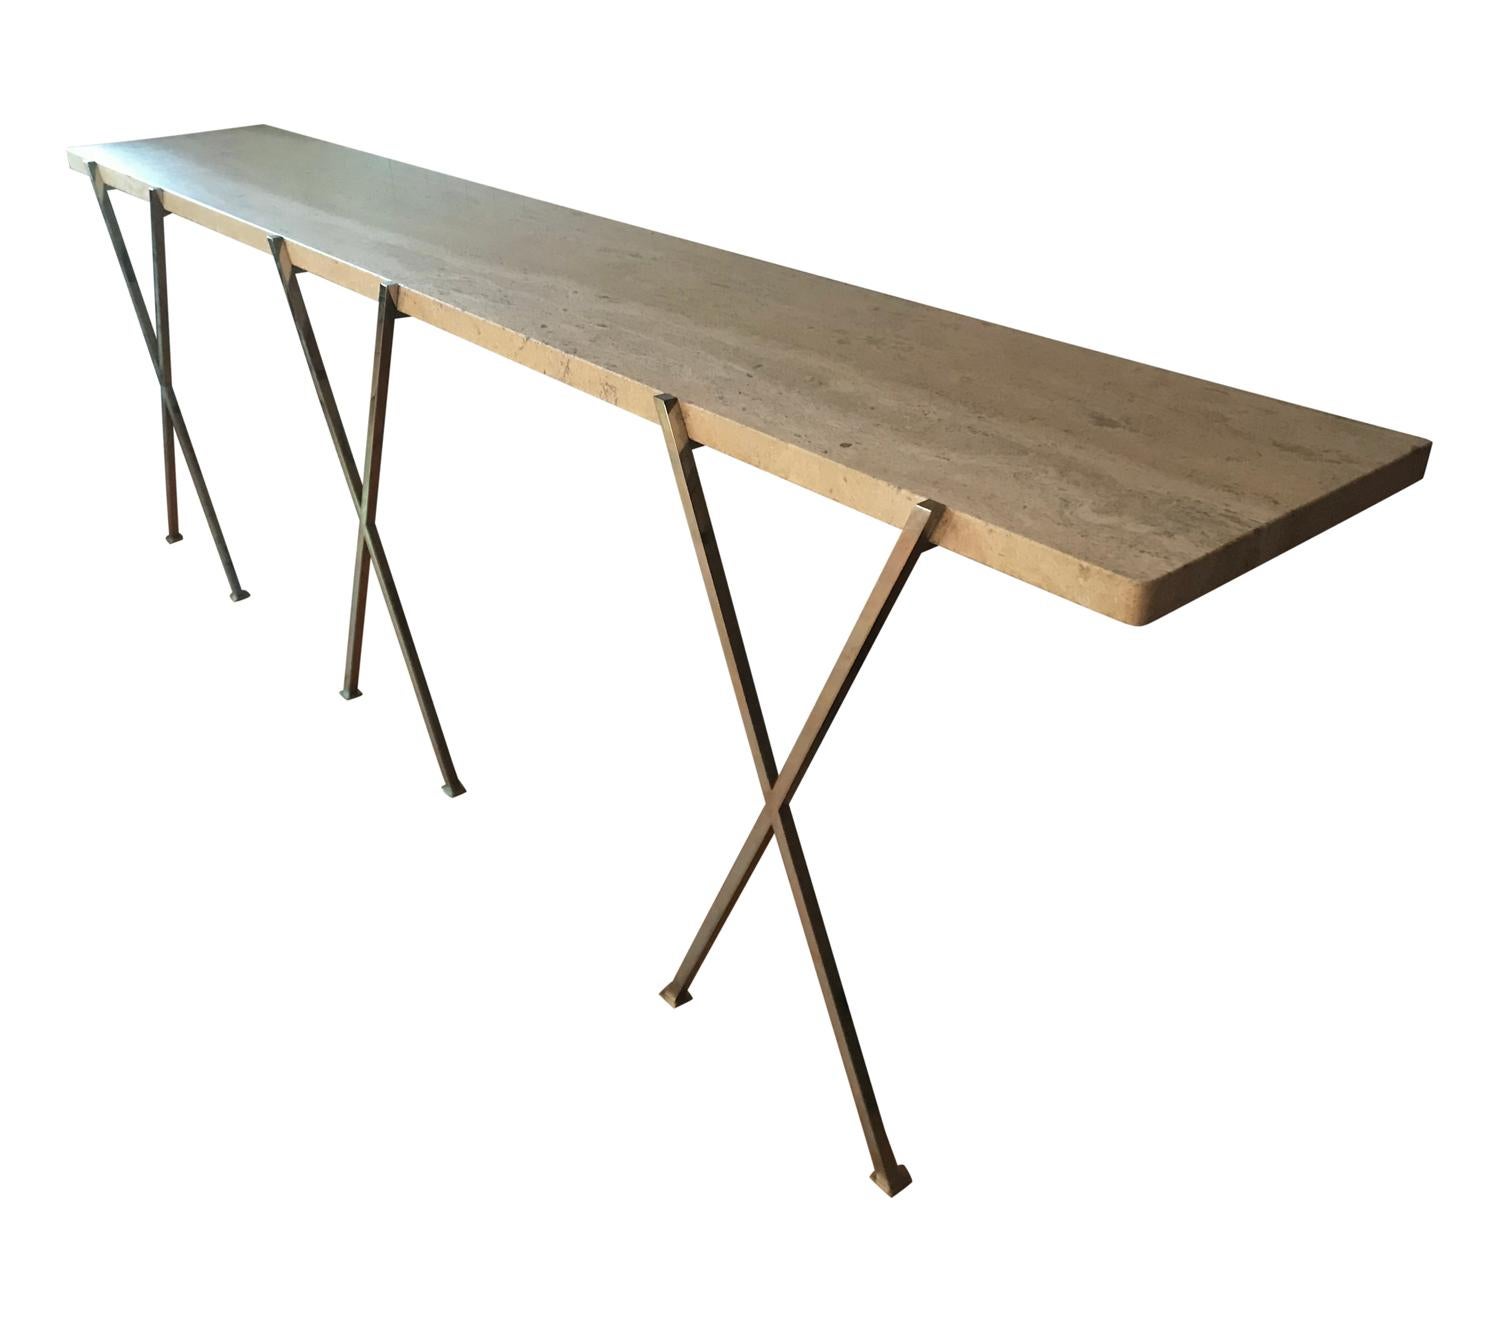 An extra-long and monumental floating console table or hallway table. This very impressive piece consists of polished steel X-braces with a thick long piece of travertine. In perfect vintage condition.